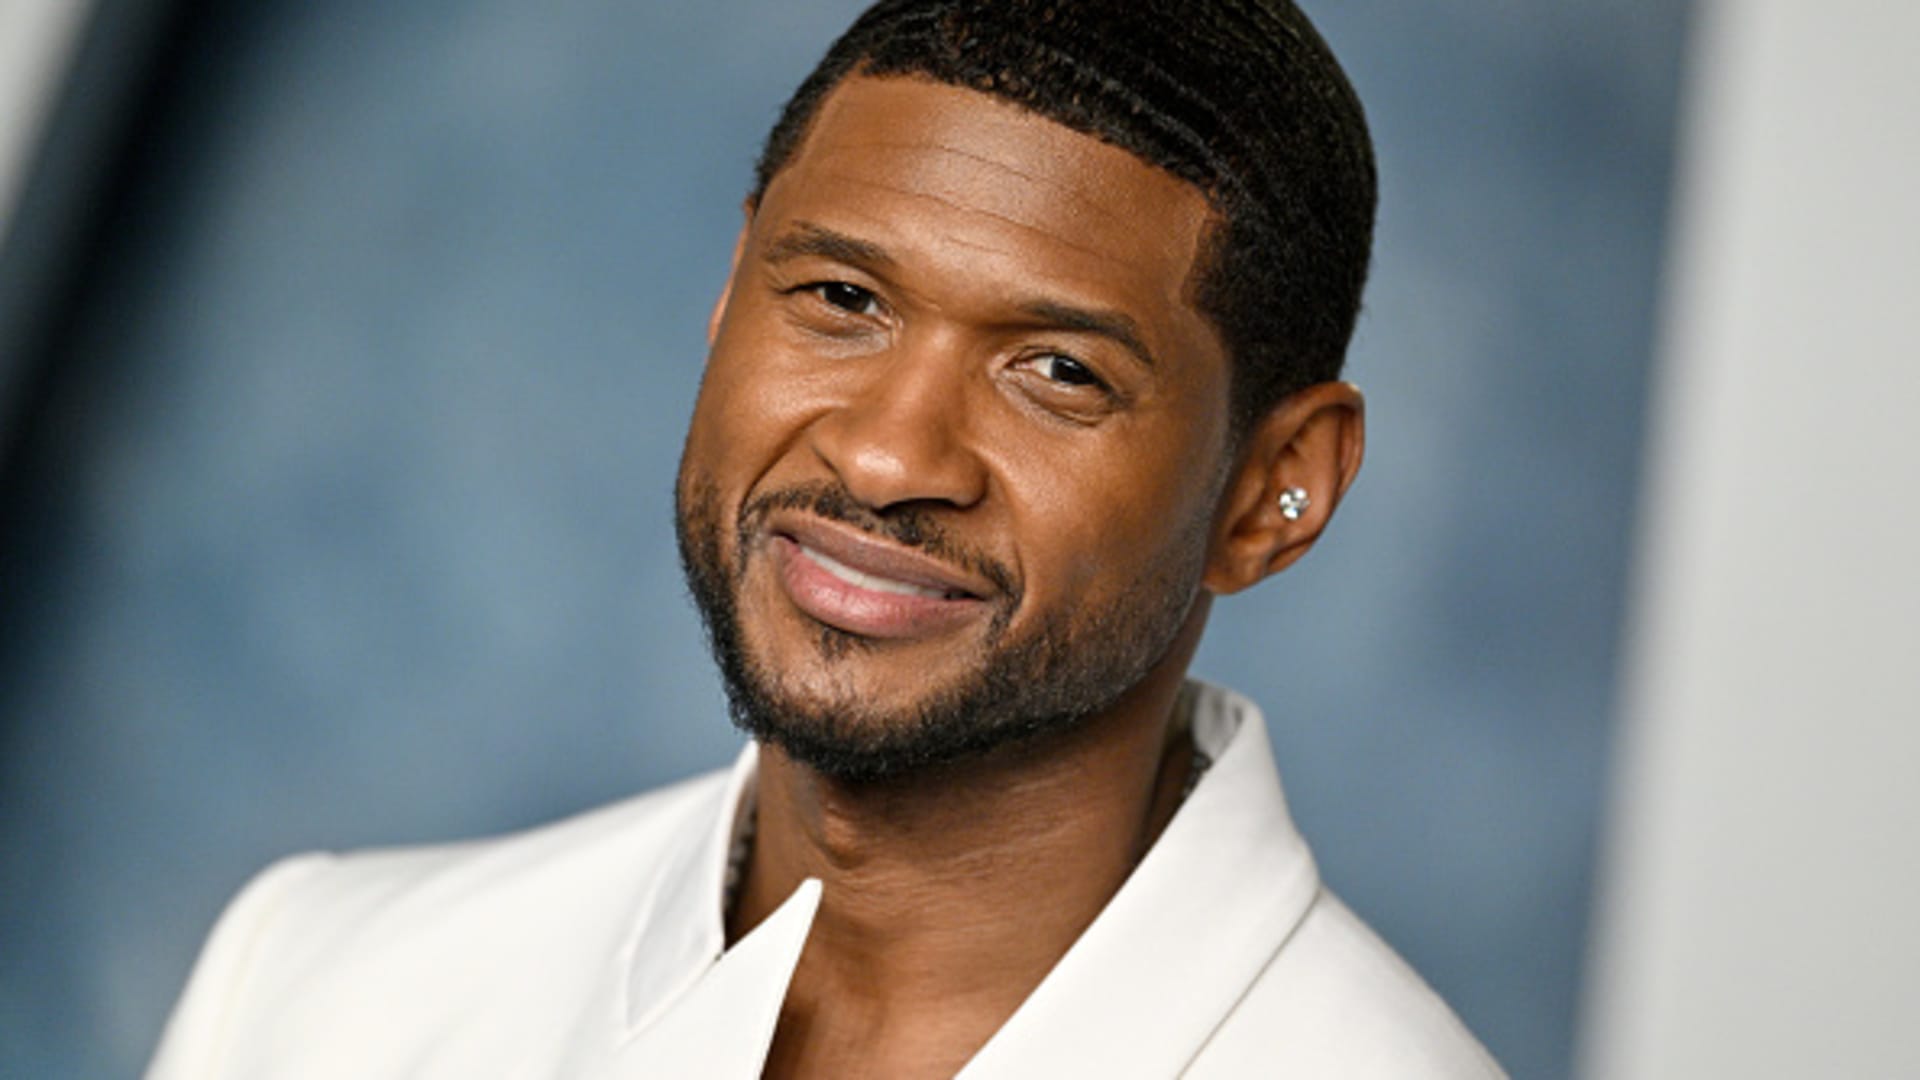 Usher on his child’s Type 1 diagnosis, early detection and risk [Video]